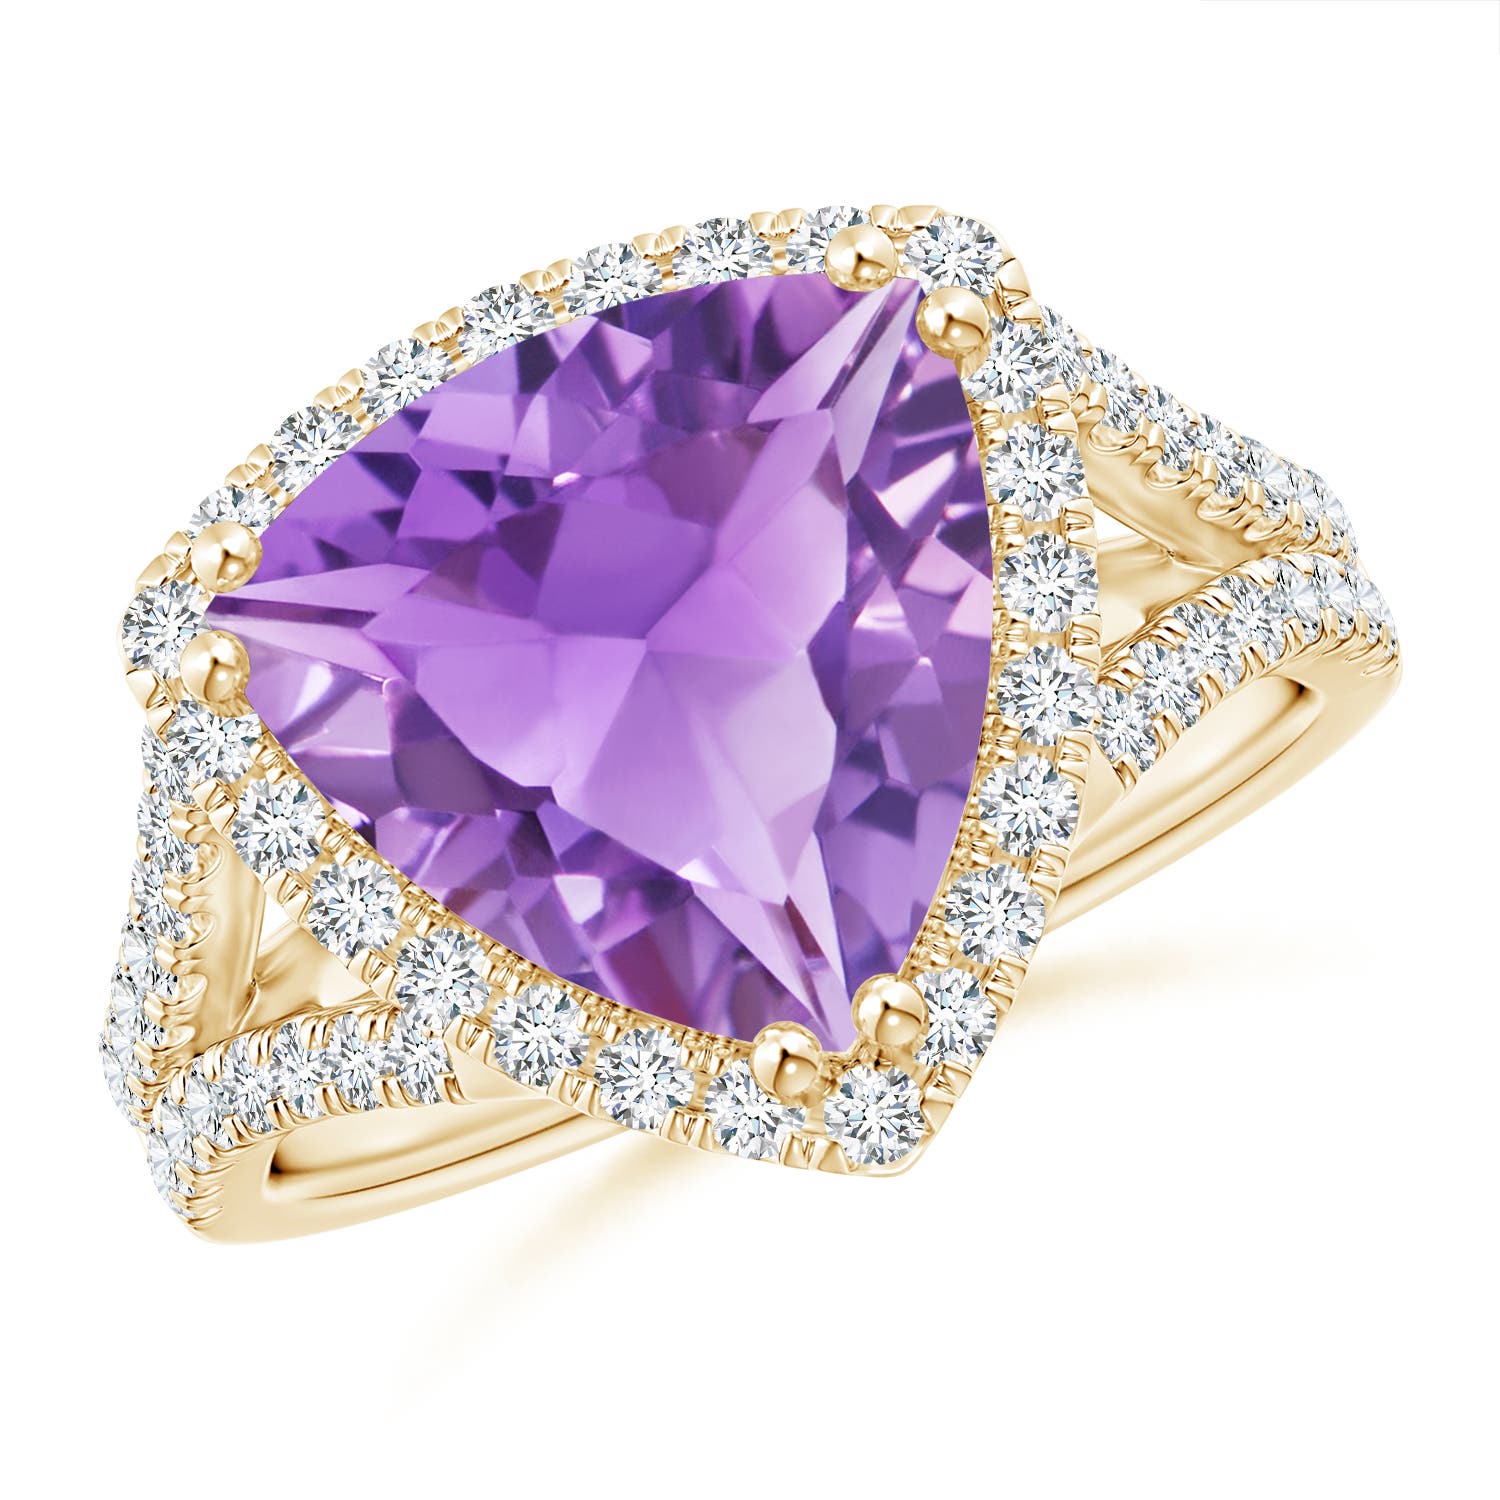 A - Amethyst / 4.47 CT / 14 KT Yellow Gold